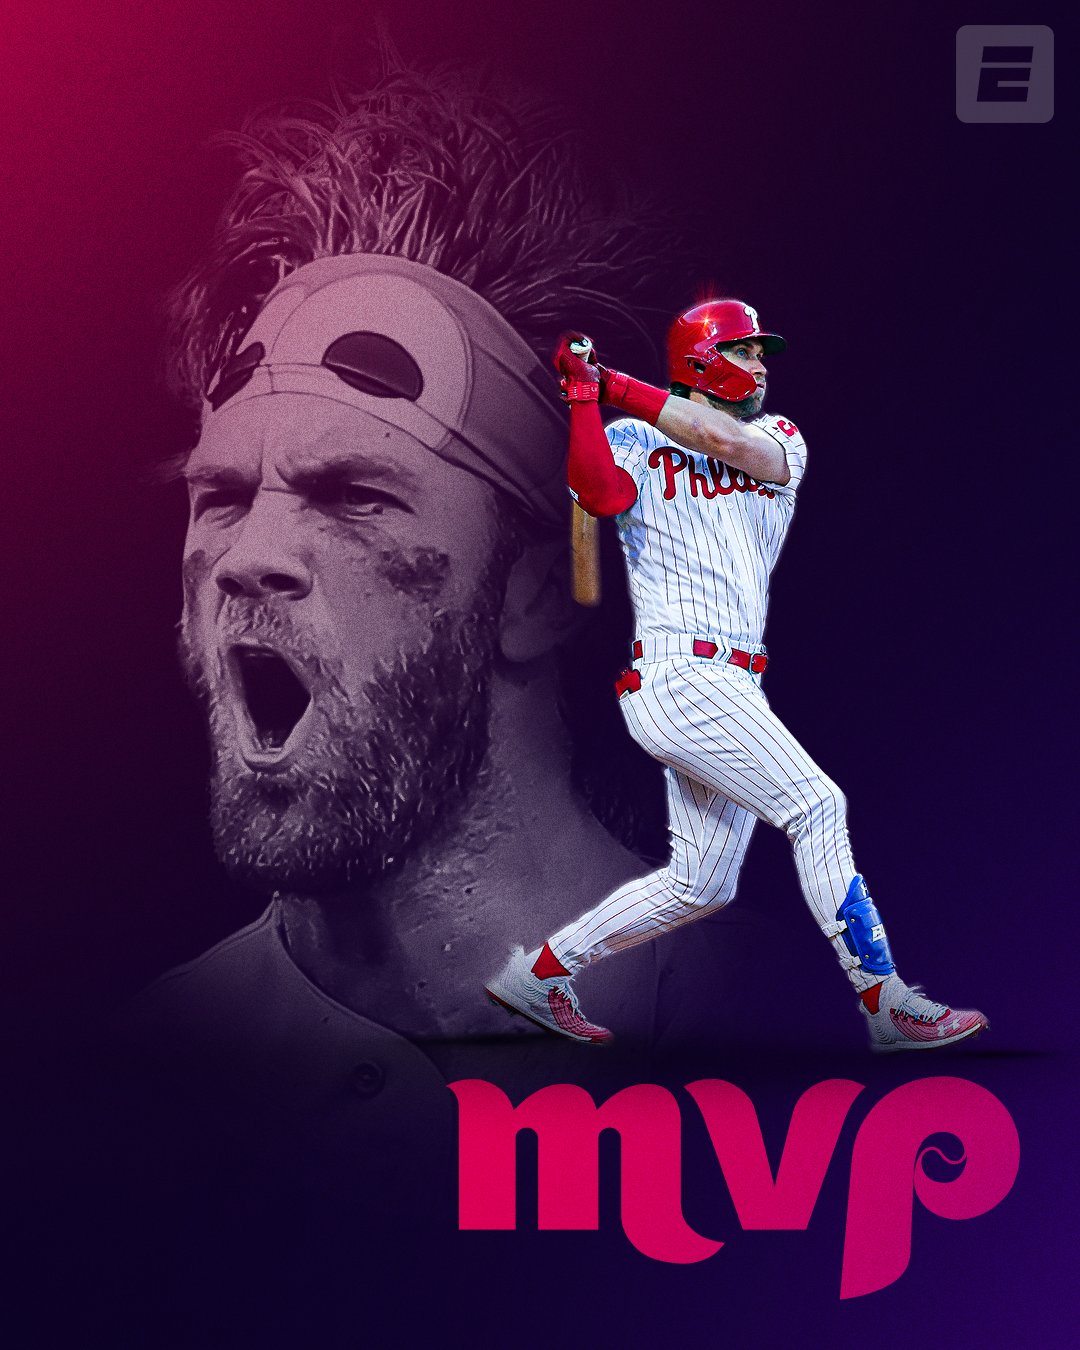 SportsCenter on X: MVP x2 🏆🏆 Bryce Harper wins NL MVP for the 2nd time  in his career 👏  / X